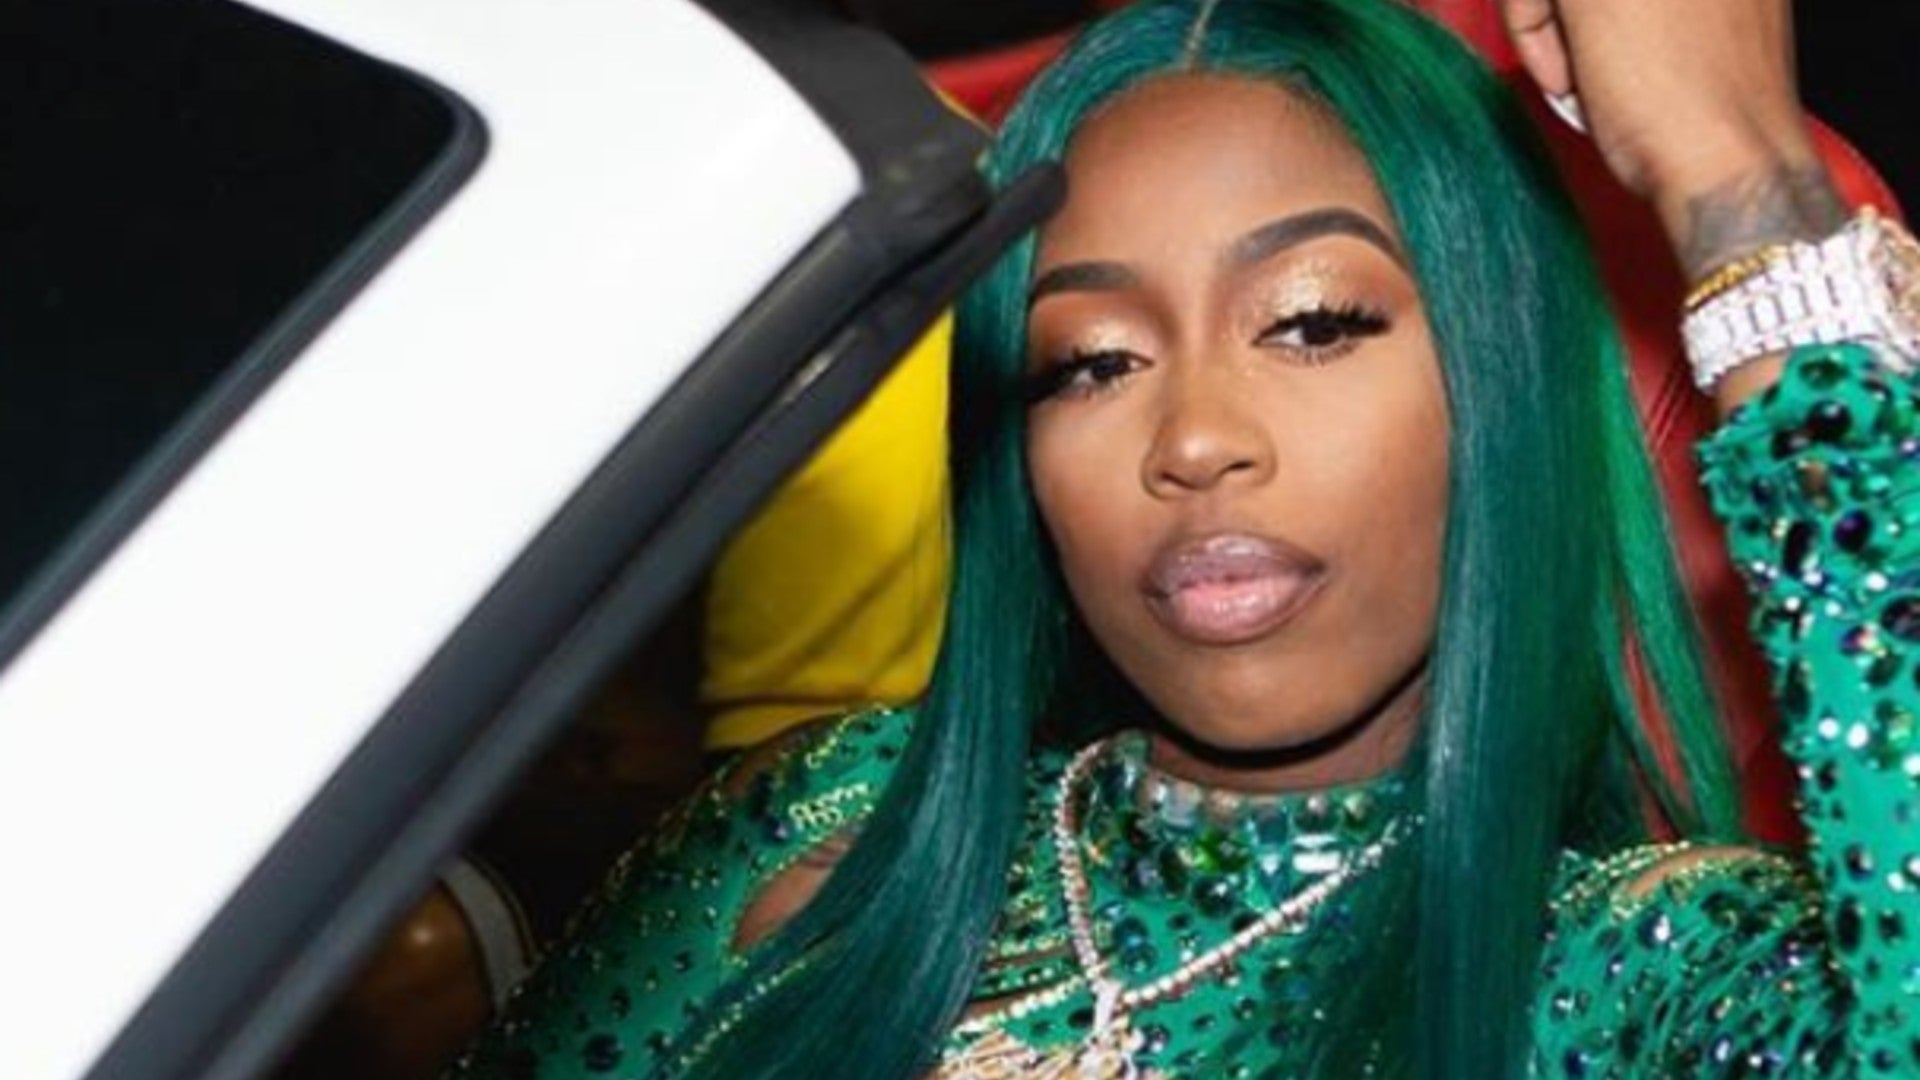 Is Green The New It Hair Color?